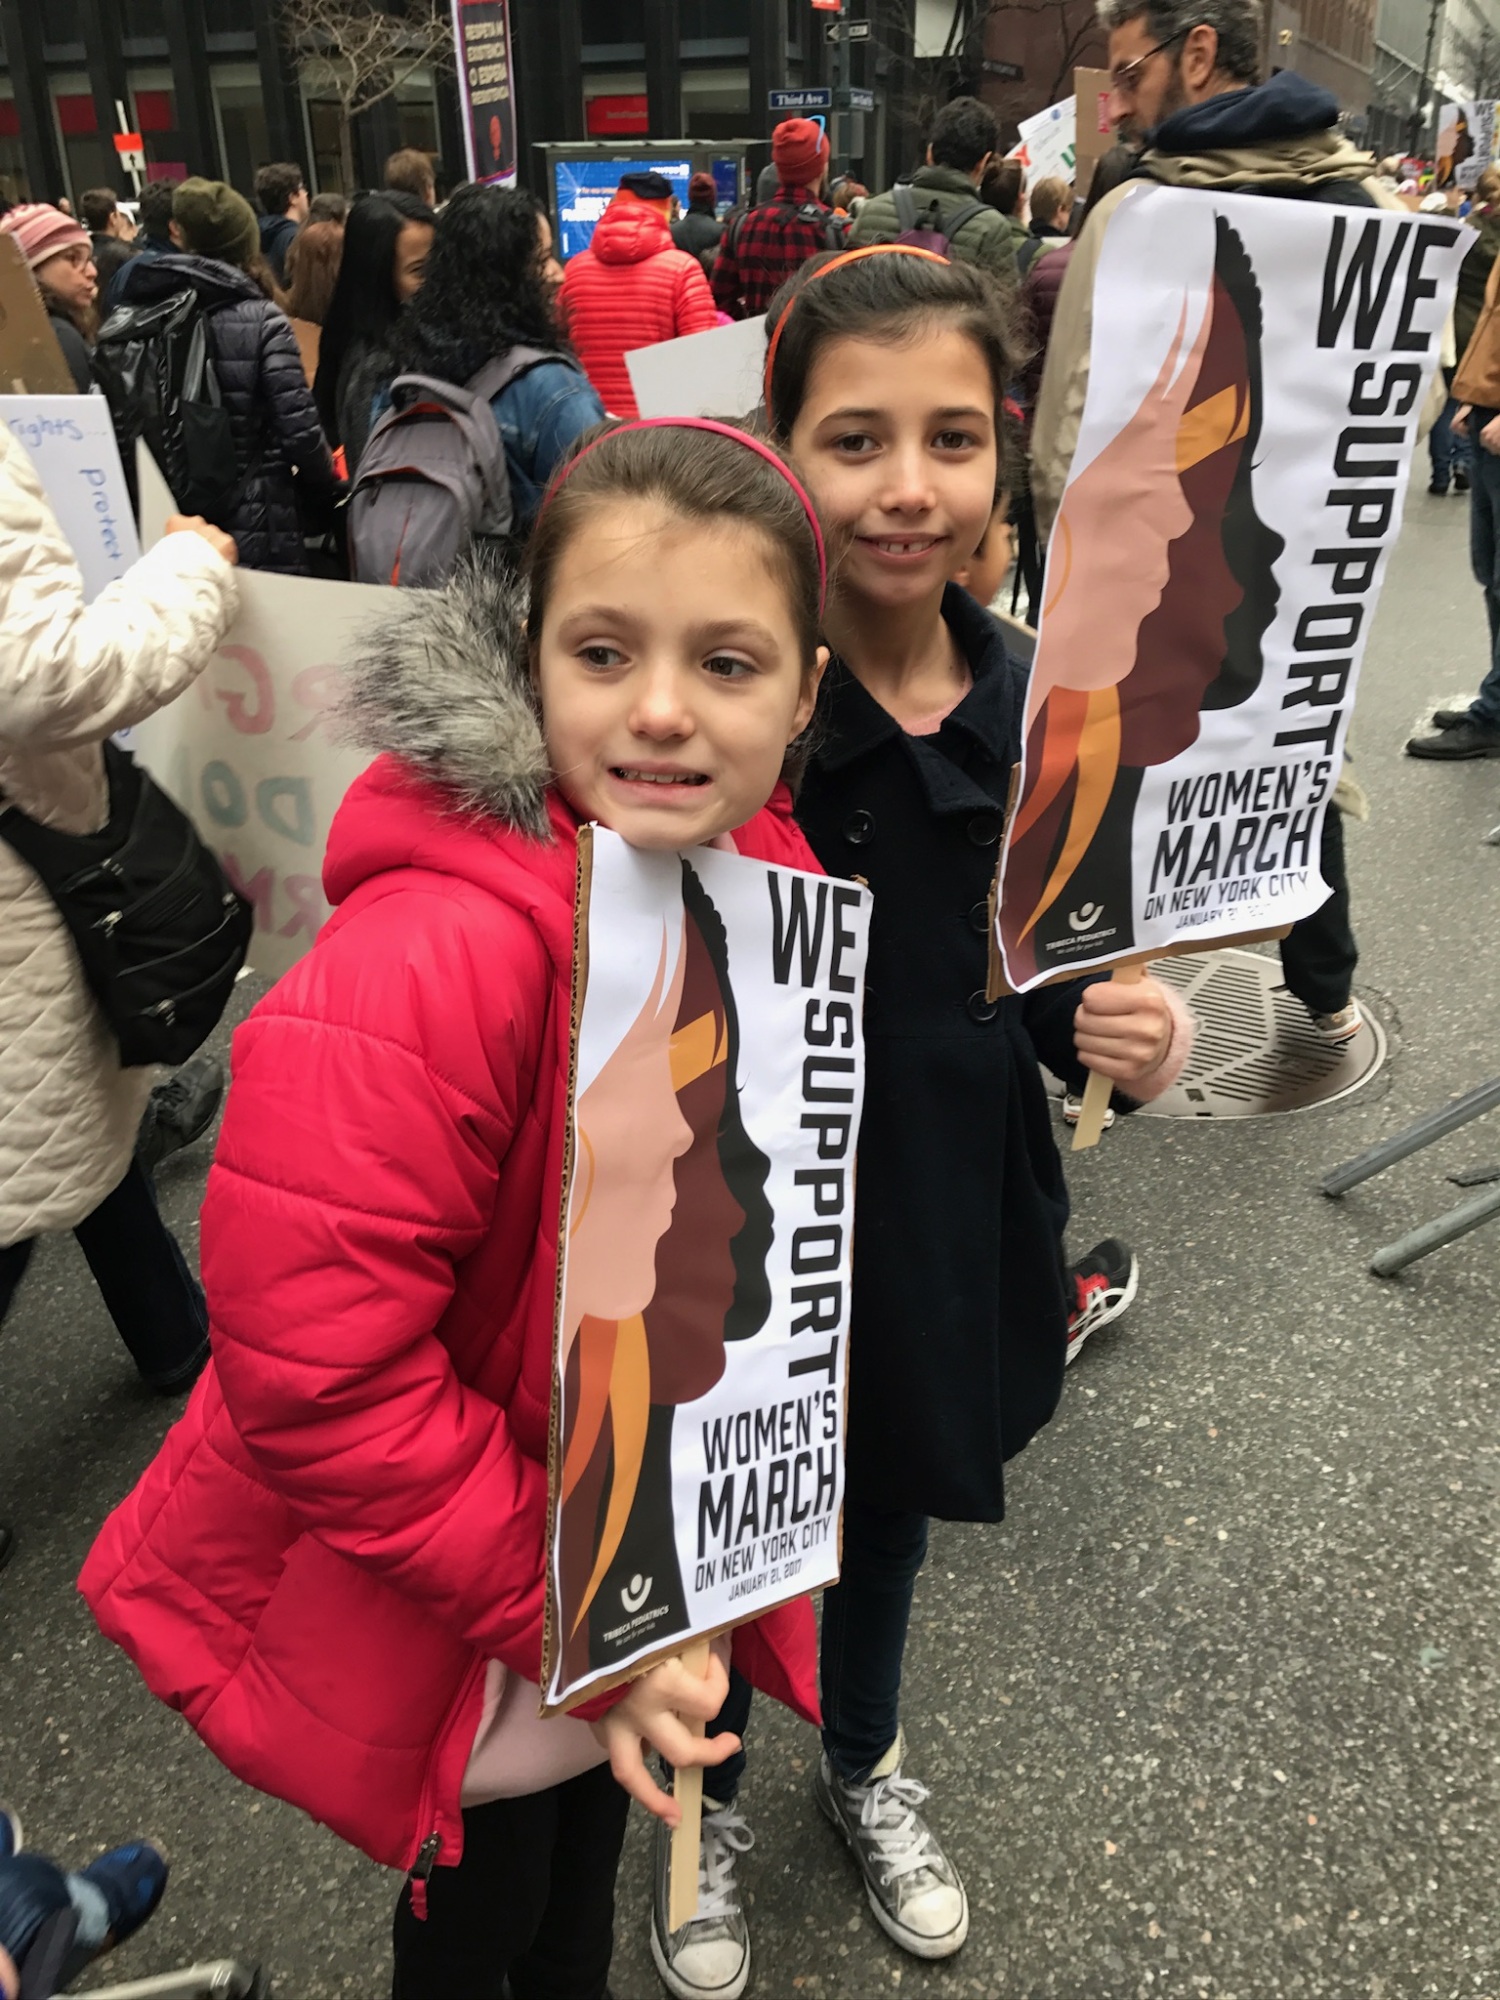 Two young girls holding "we support women's march" banners at a crowded street demonstration.